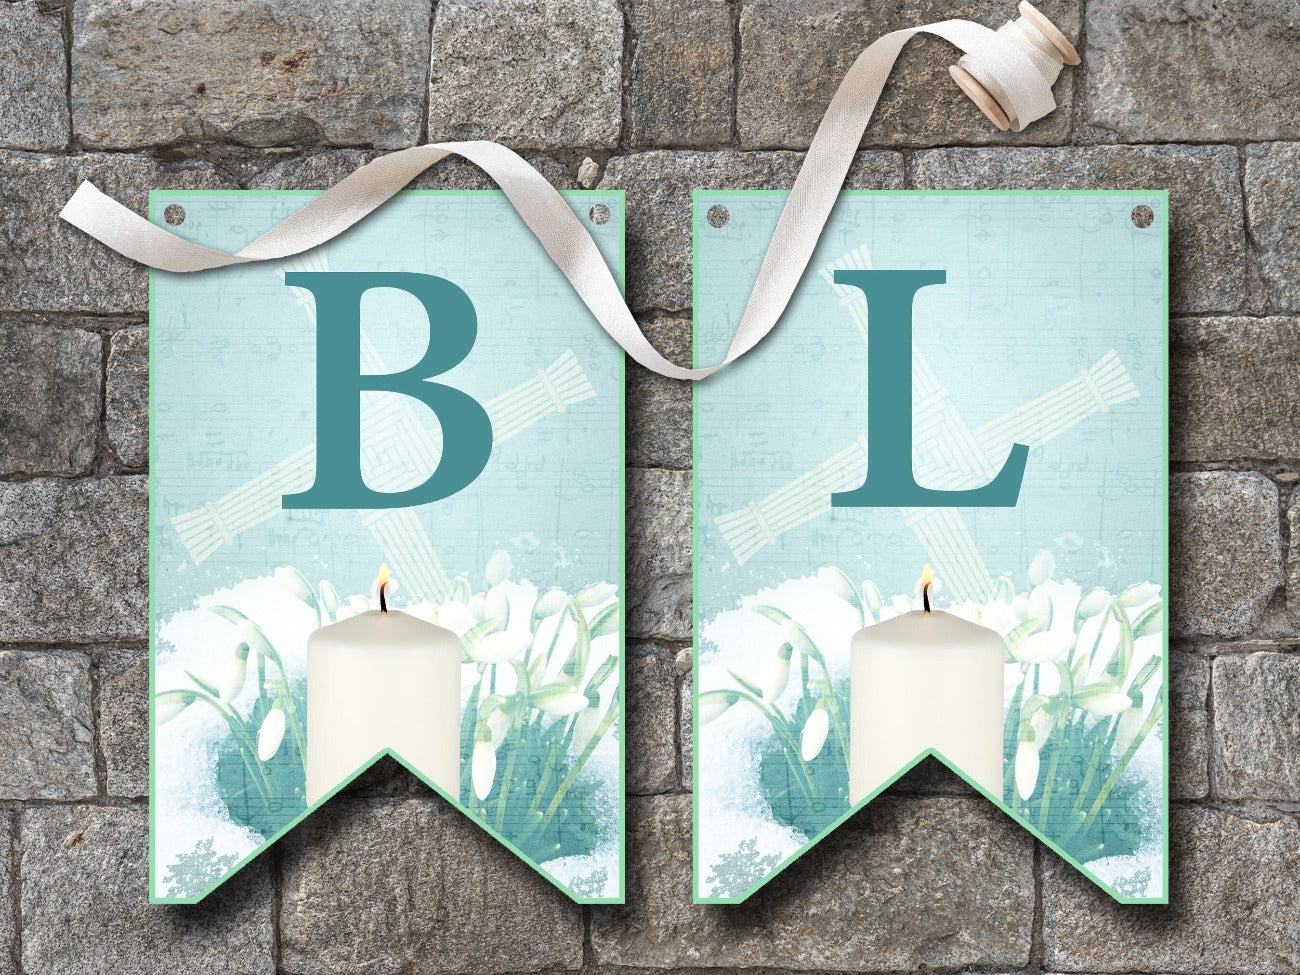 IMBOLC BANNER Bunting, Flags B and L, flags are pale blue with dark blue letters, each flag is imbellished with a Brigids Cross, snowdrops peeking through a layer of snow and a lit white candle - Morgana Magick Spell